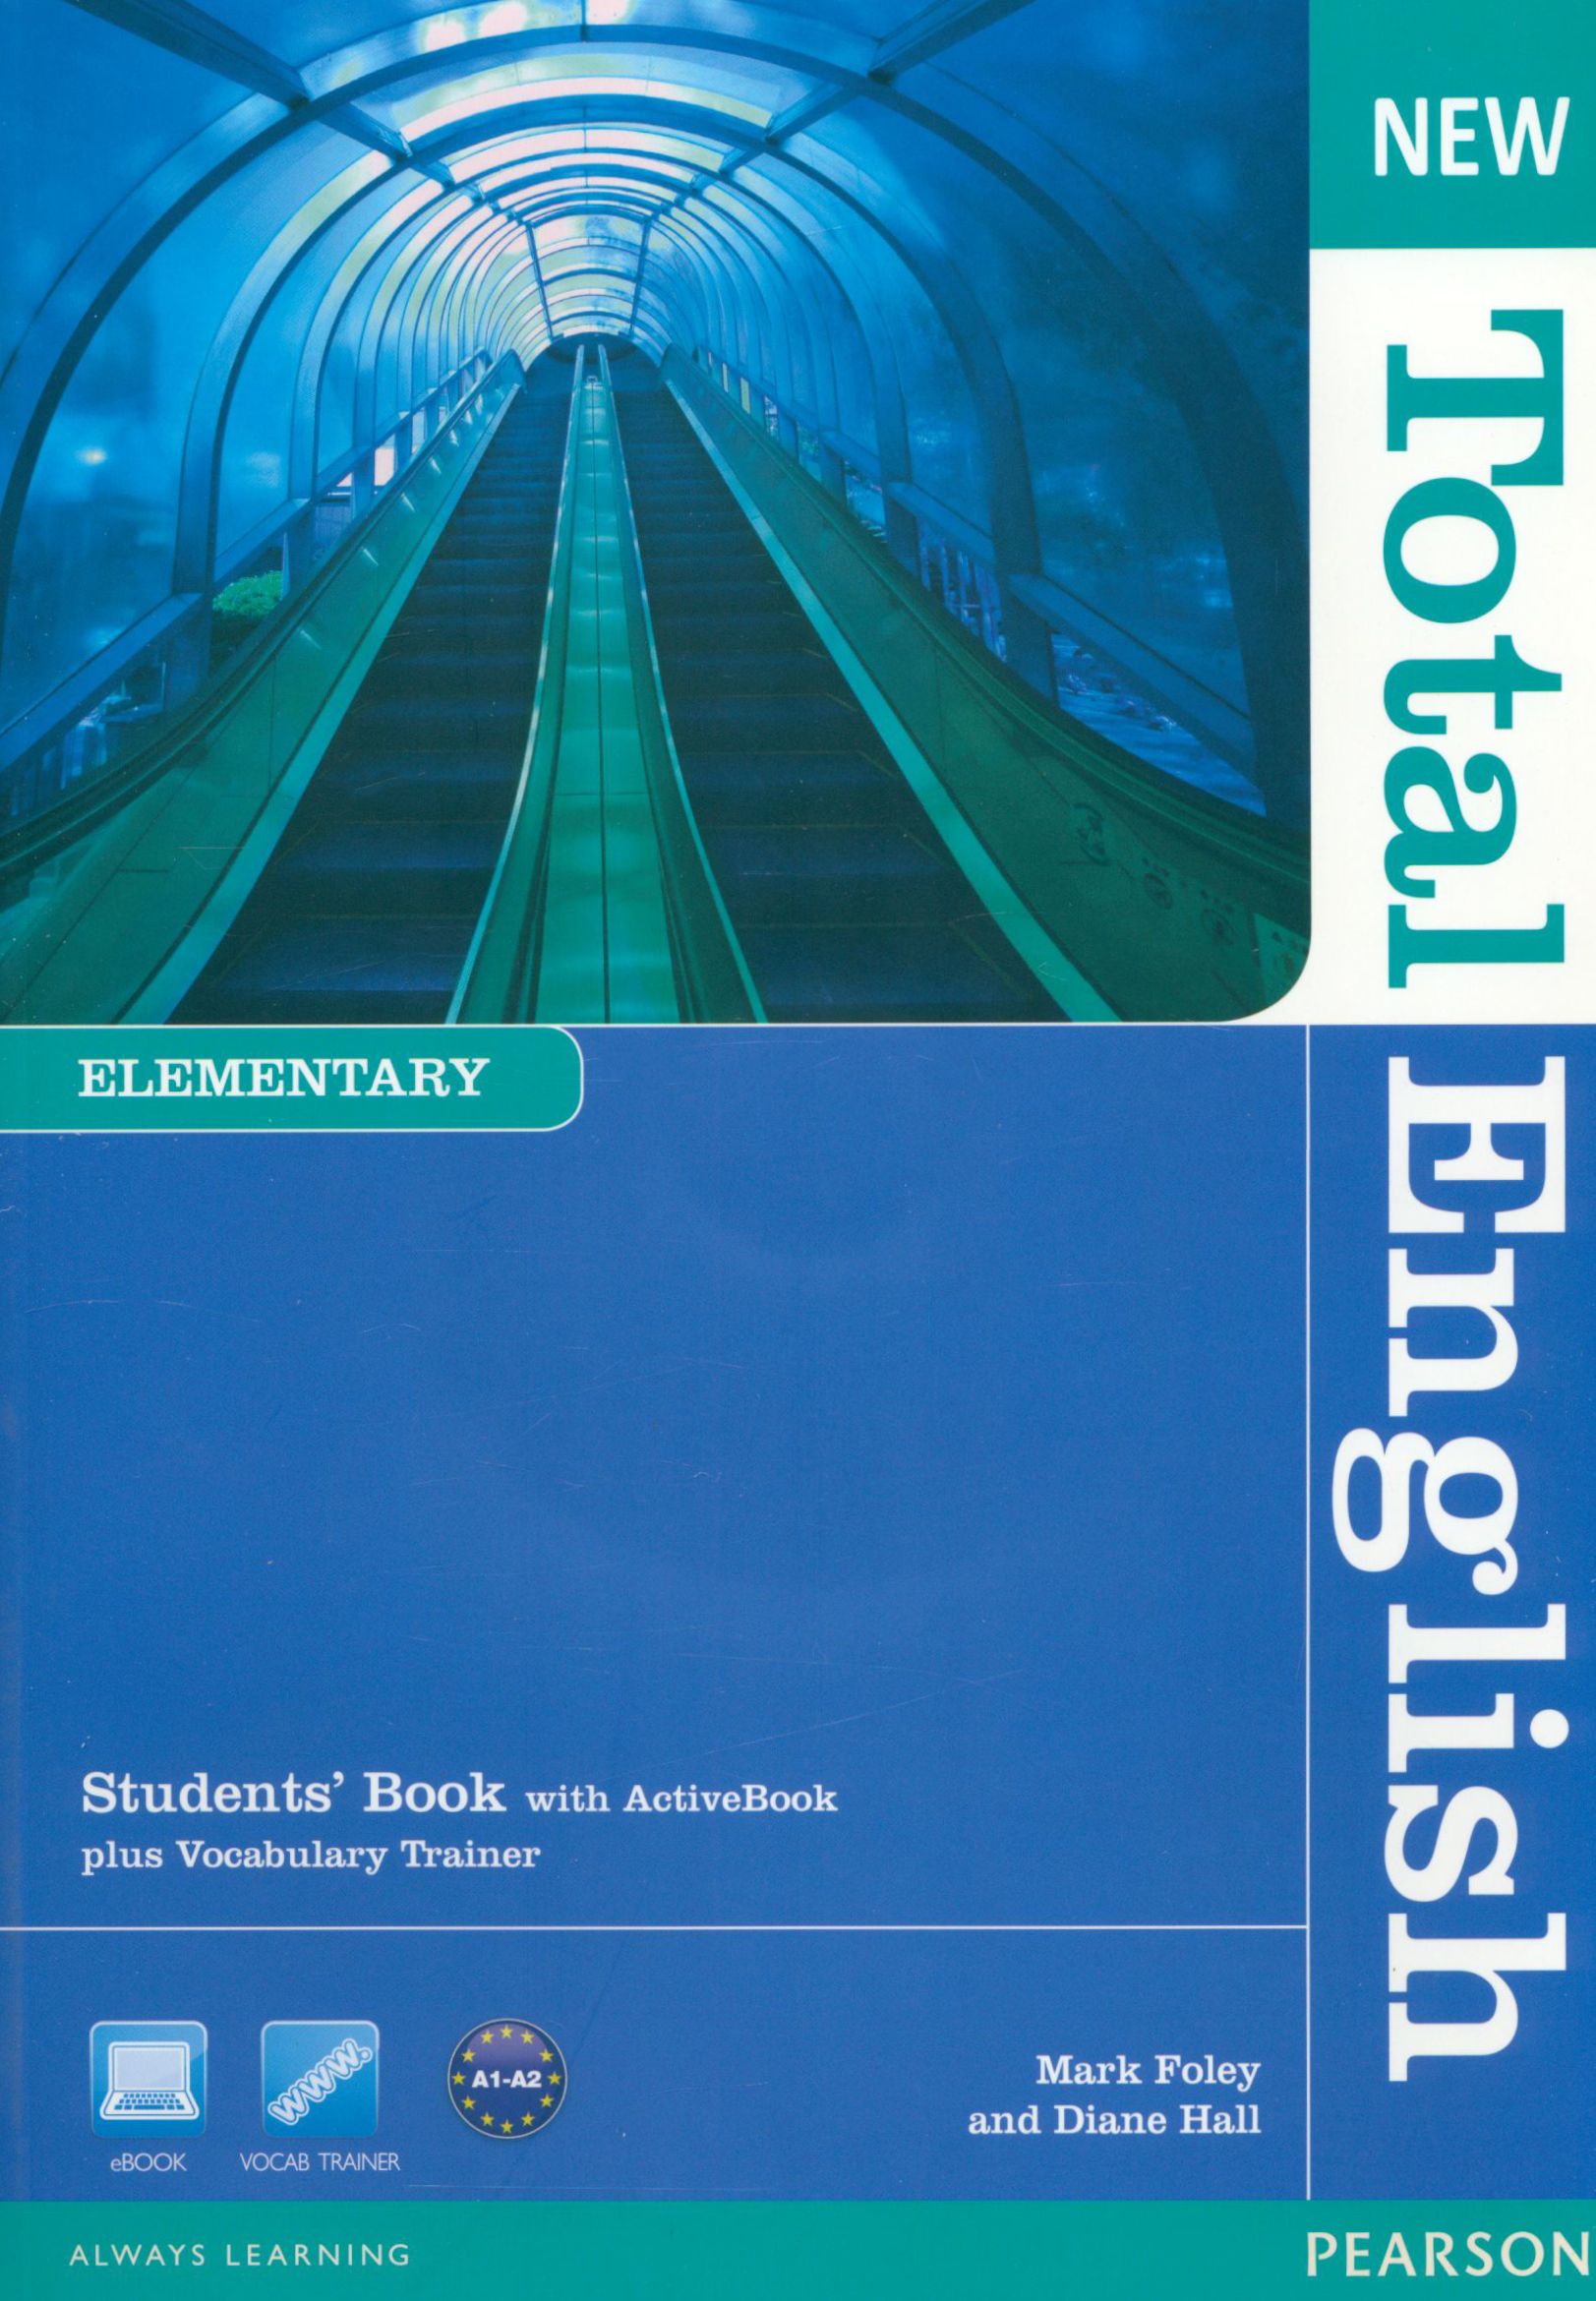 New total English элементари. New total English учебник. Учебник total English students book. Учебник total English Elementary. Student total english